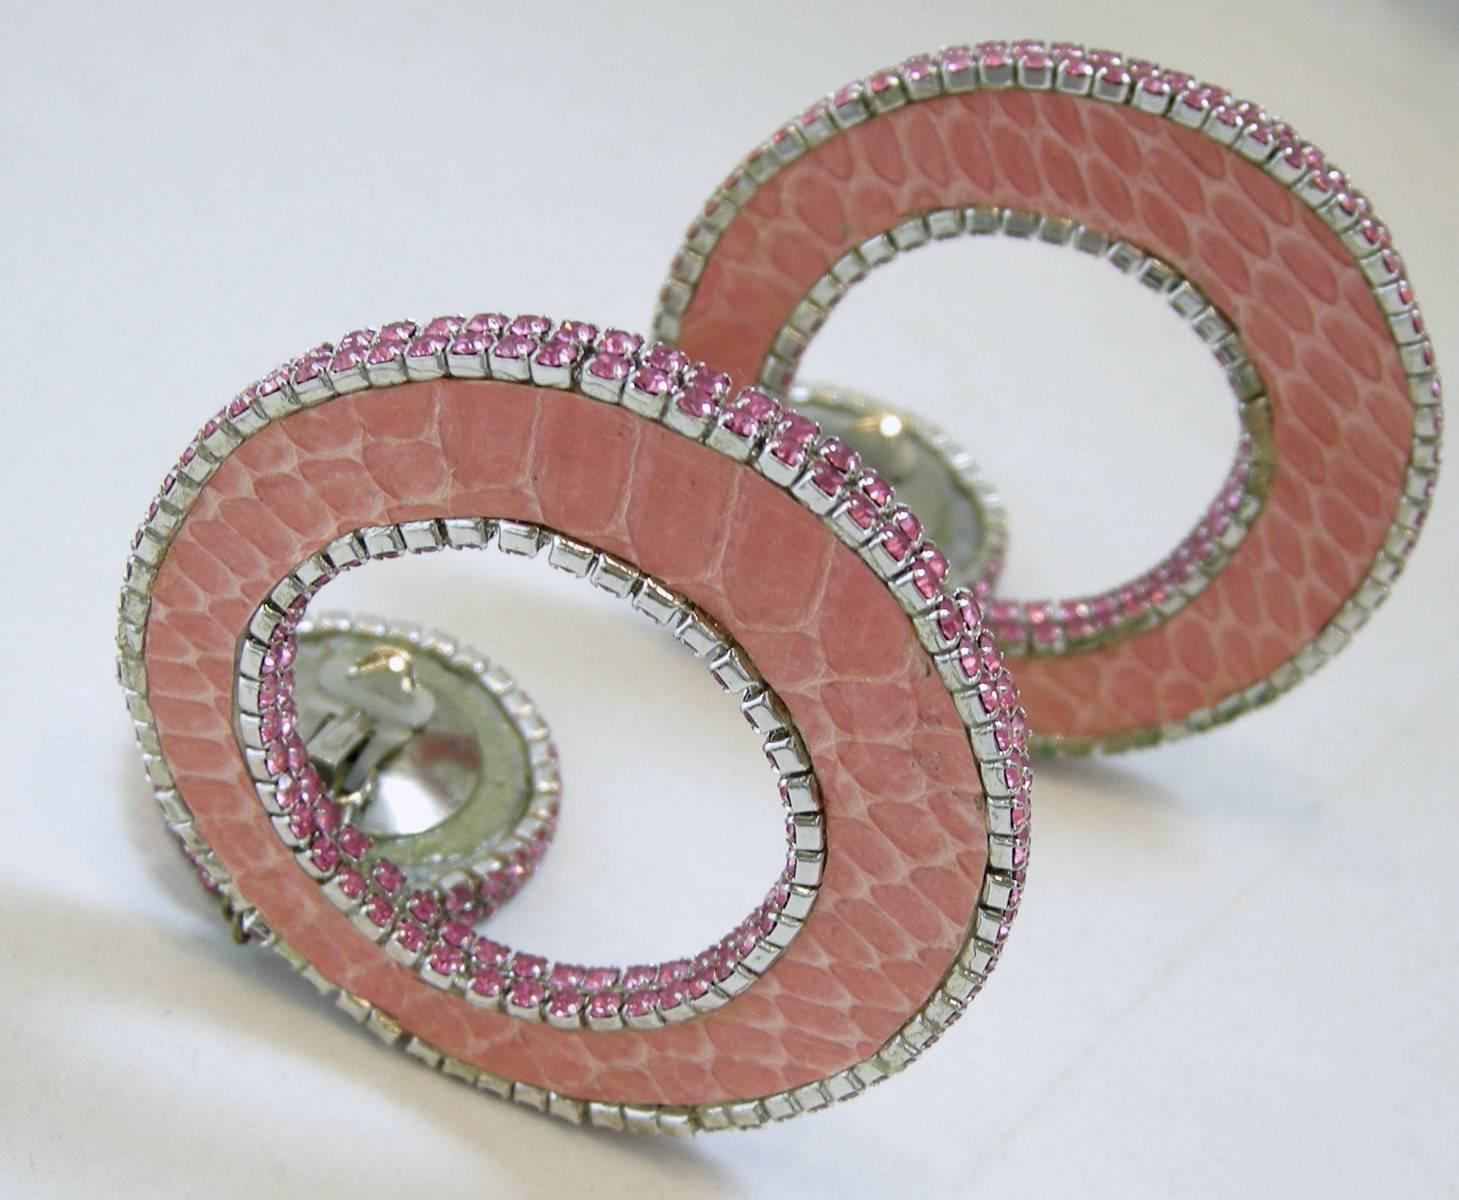 These Vintage happy earrings were made in the 1970s. They were made with a pink faux snake skin design with rhinestones that make them dramatic and elegant at the same time. They are in a silver tone setting and measure 4” x 2 ½”.  They are in